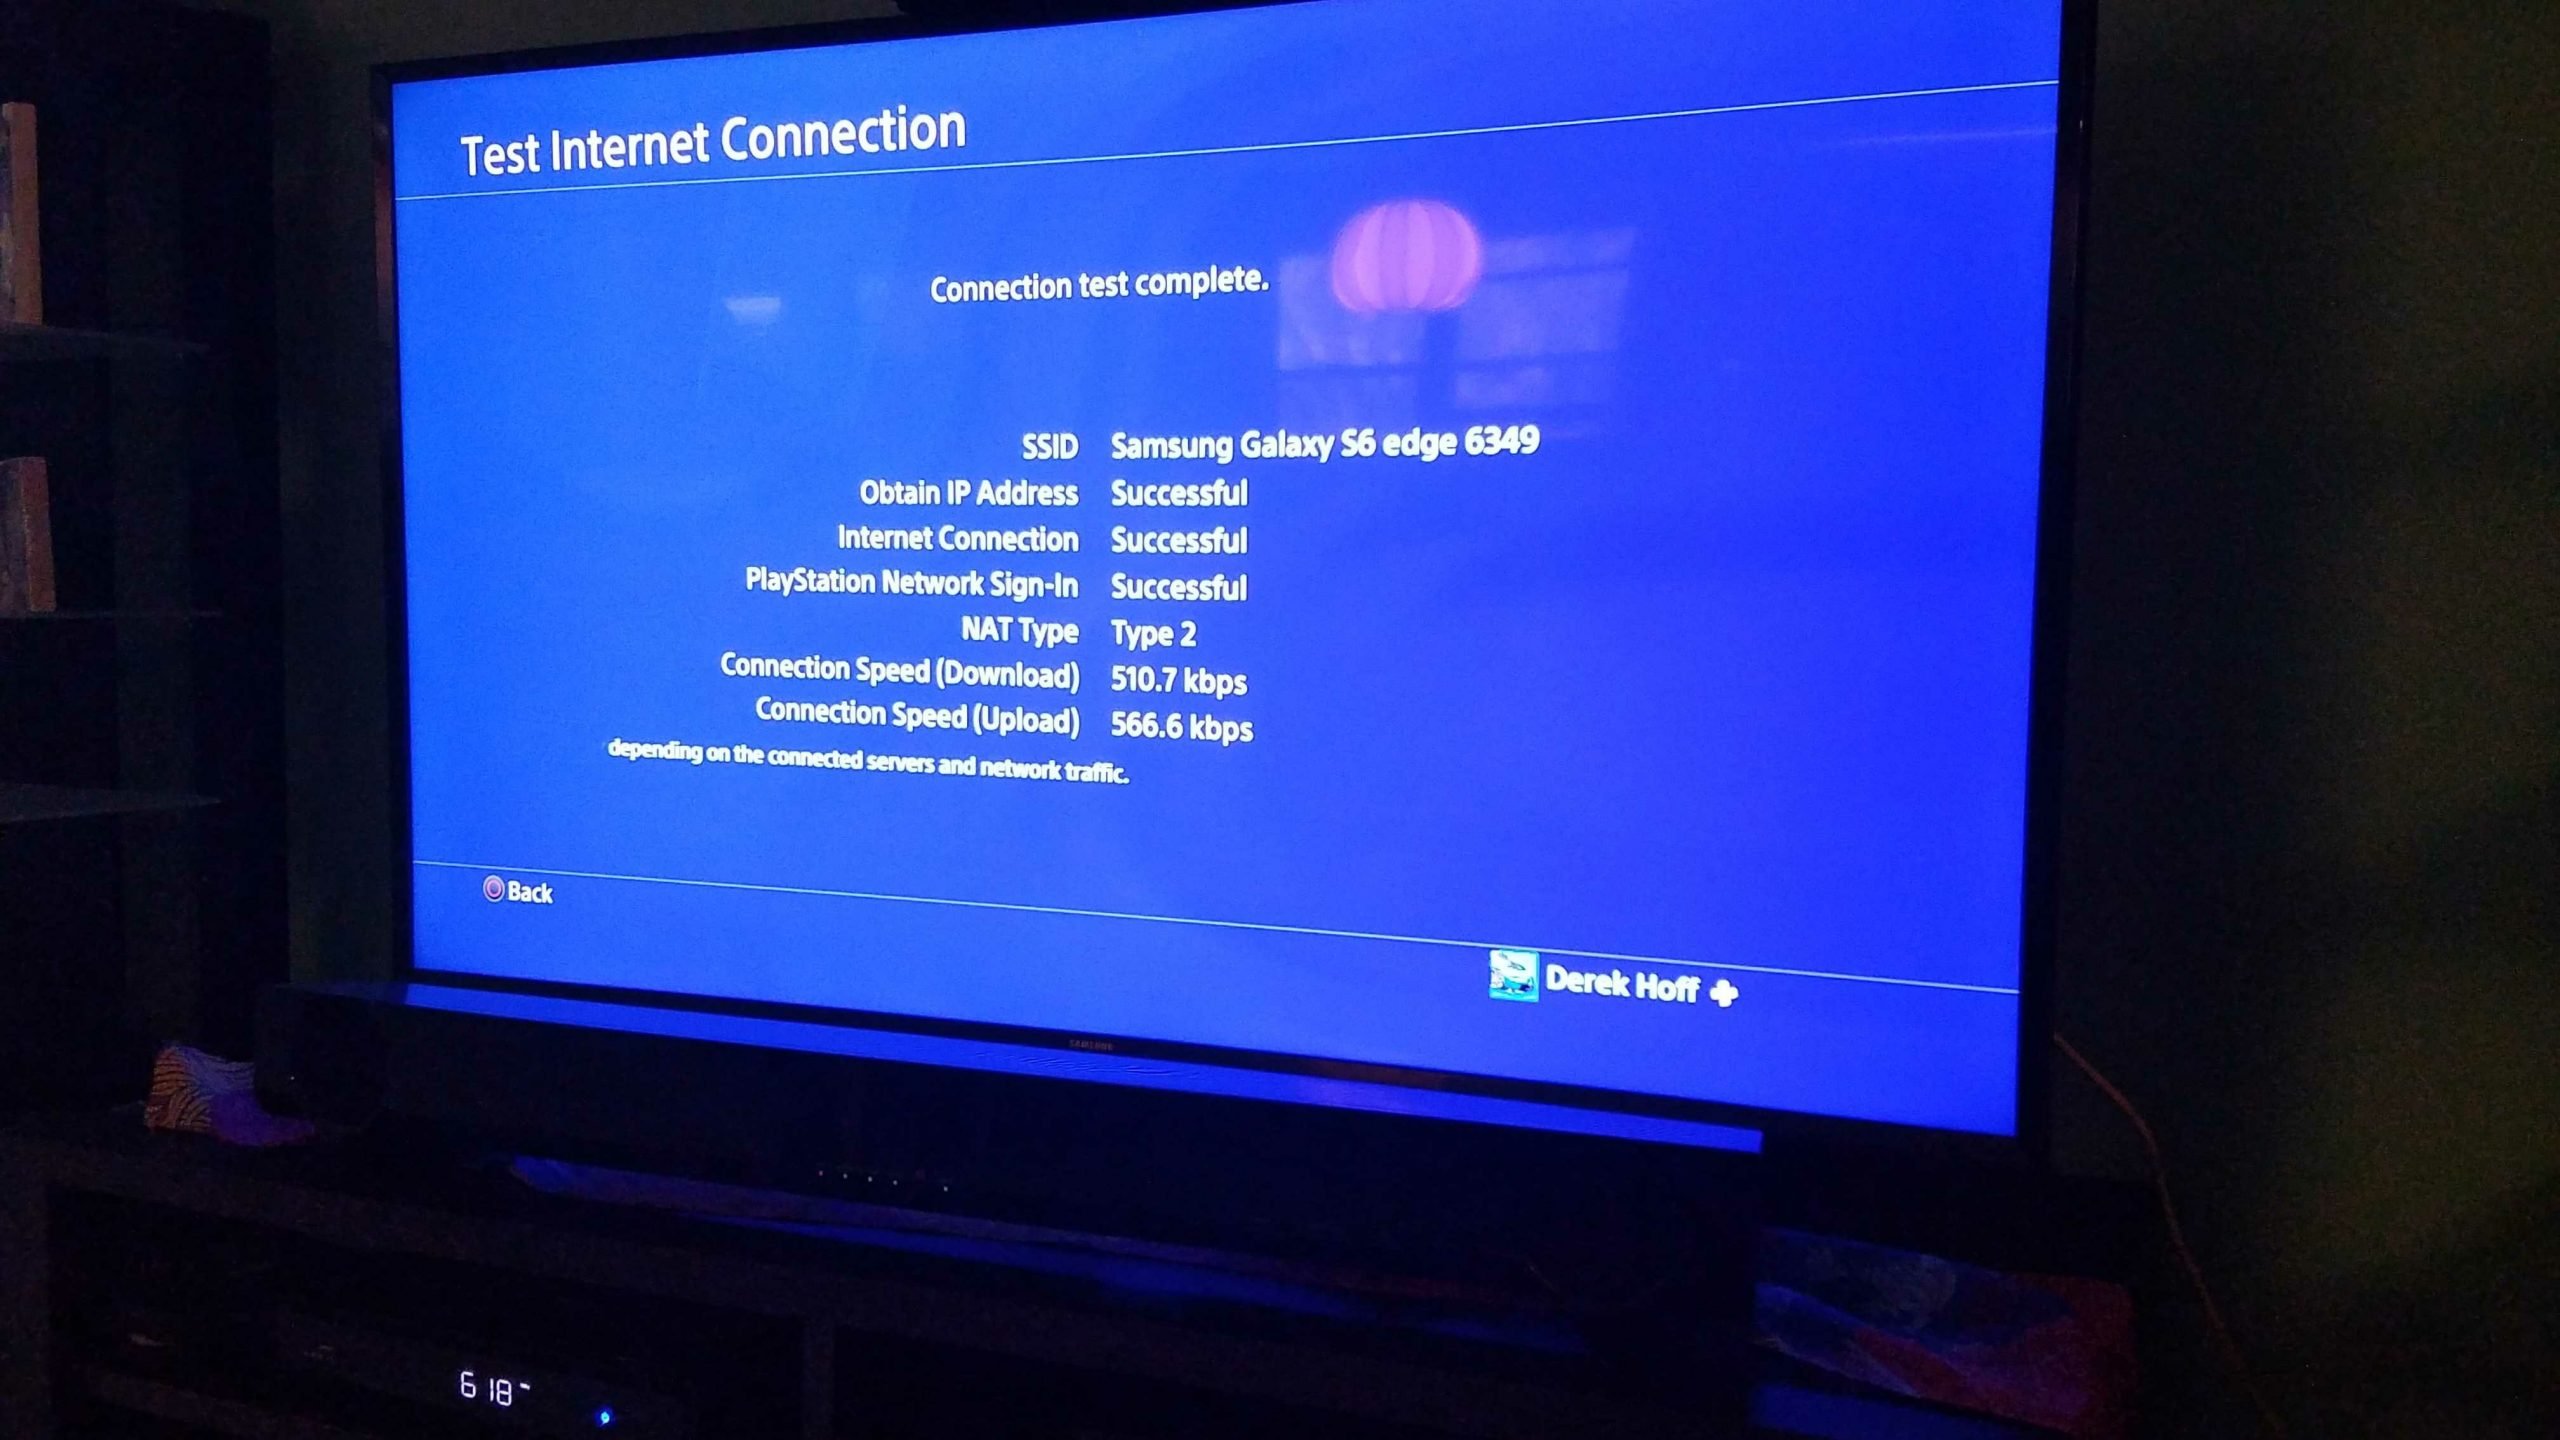 Tether ps4 to iphone hotspot?